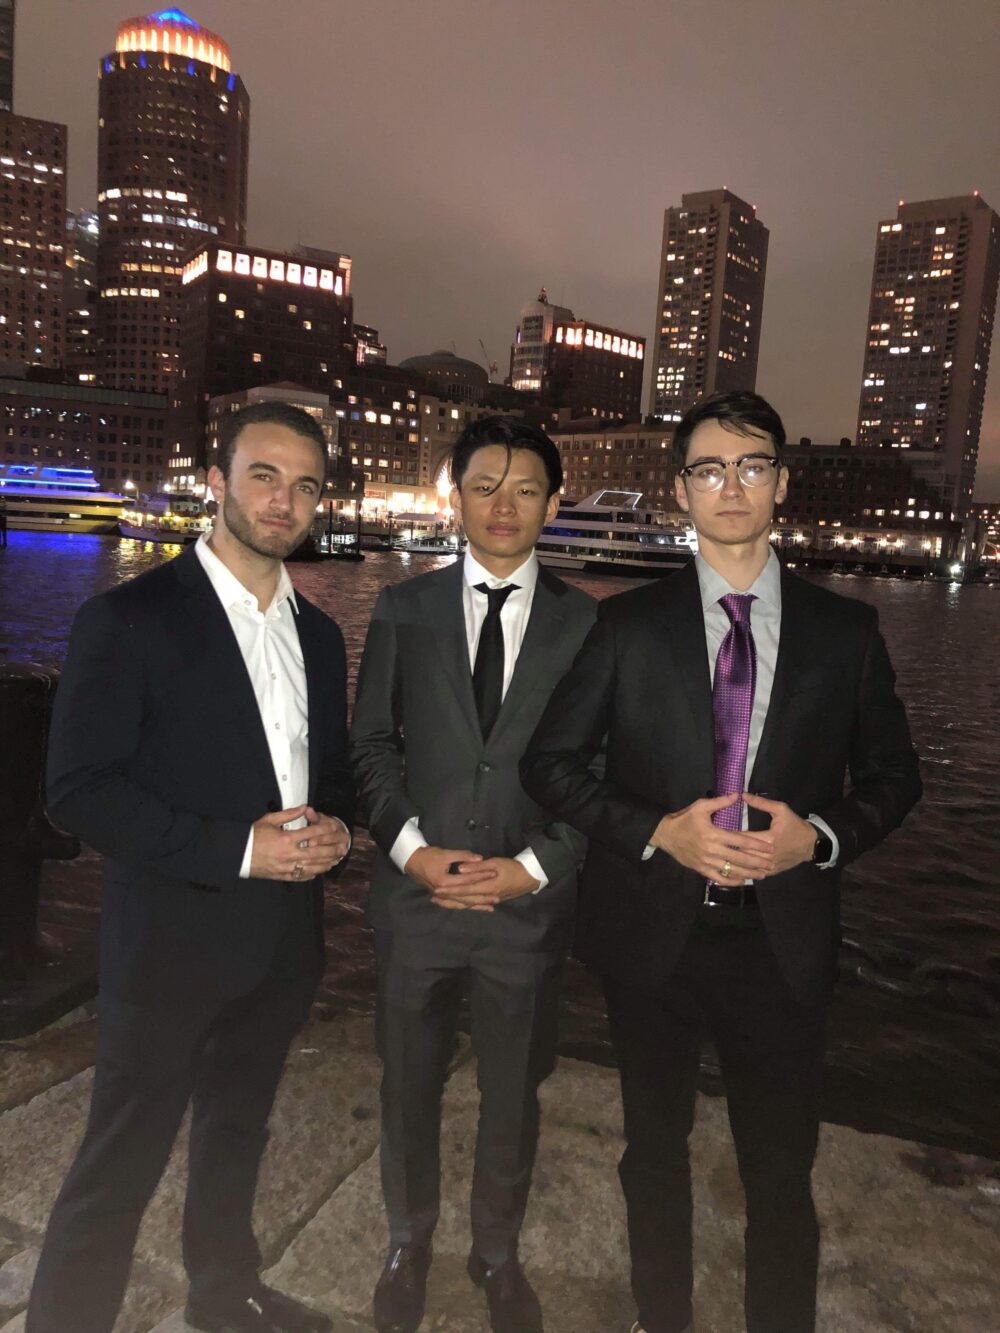 three men (aidan, aiden, and raymond) posing in front of the waterfront in their suits